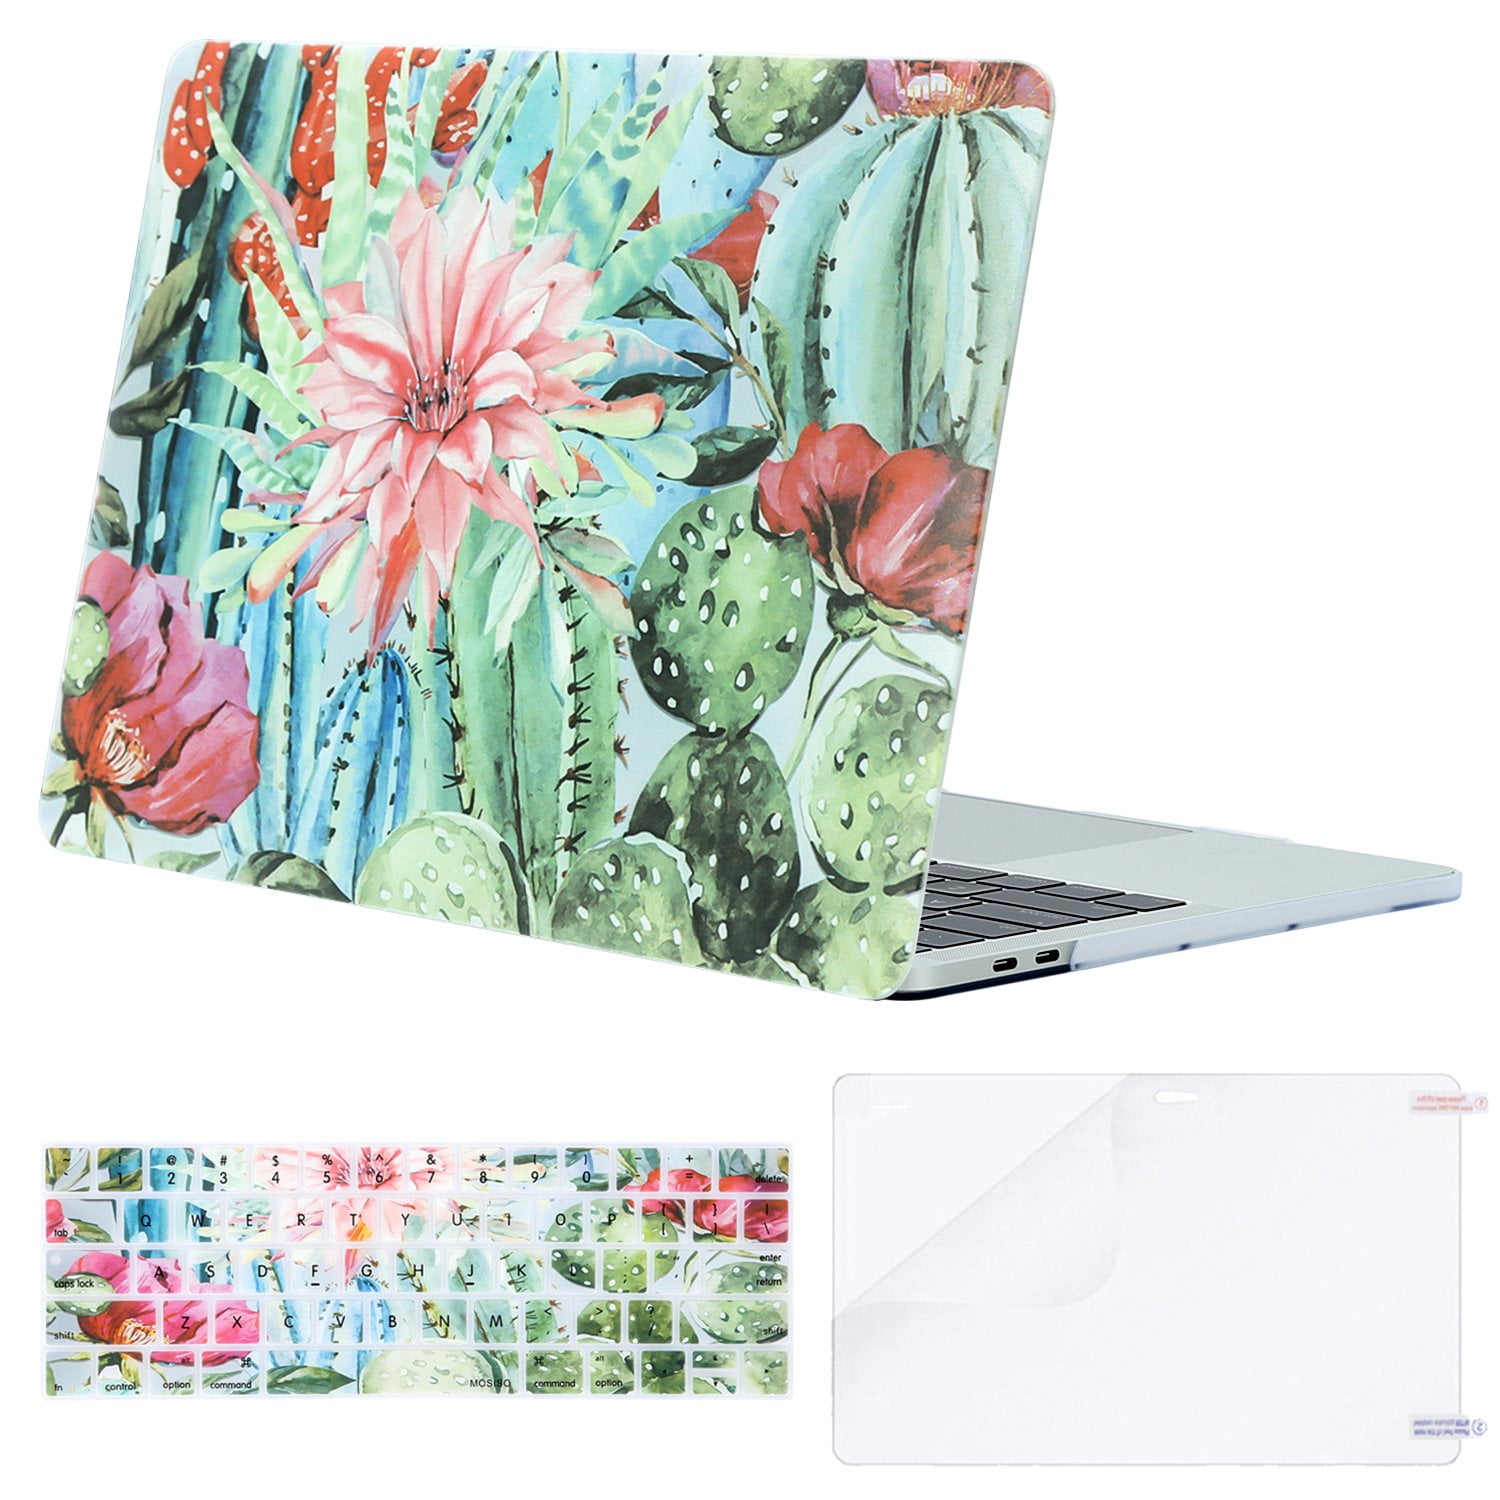 MacBook Pro Laptop Charming Amazing Yellow Rose Flowers Plastic Hard Shell Compatible Mac Air 11 Pro 13 15 A1707 MacBook Pro Case Protection for MacBook 2016-2019 Version 